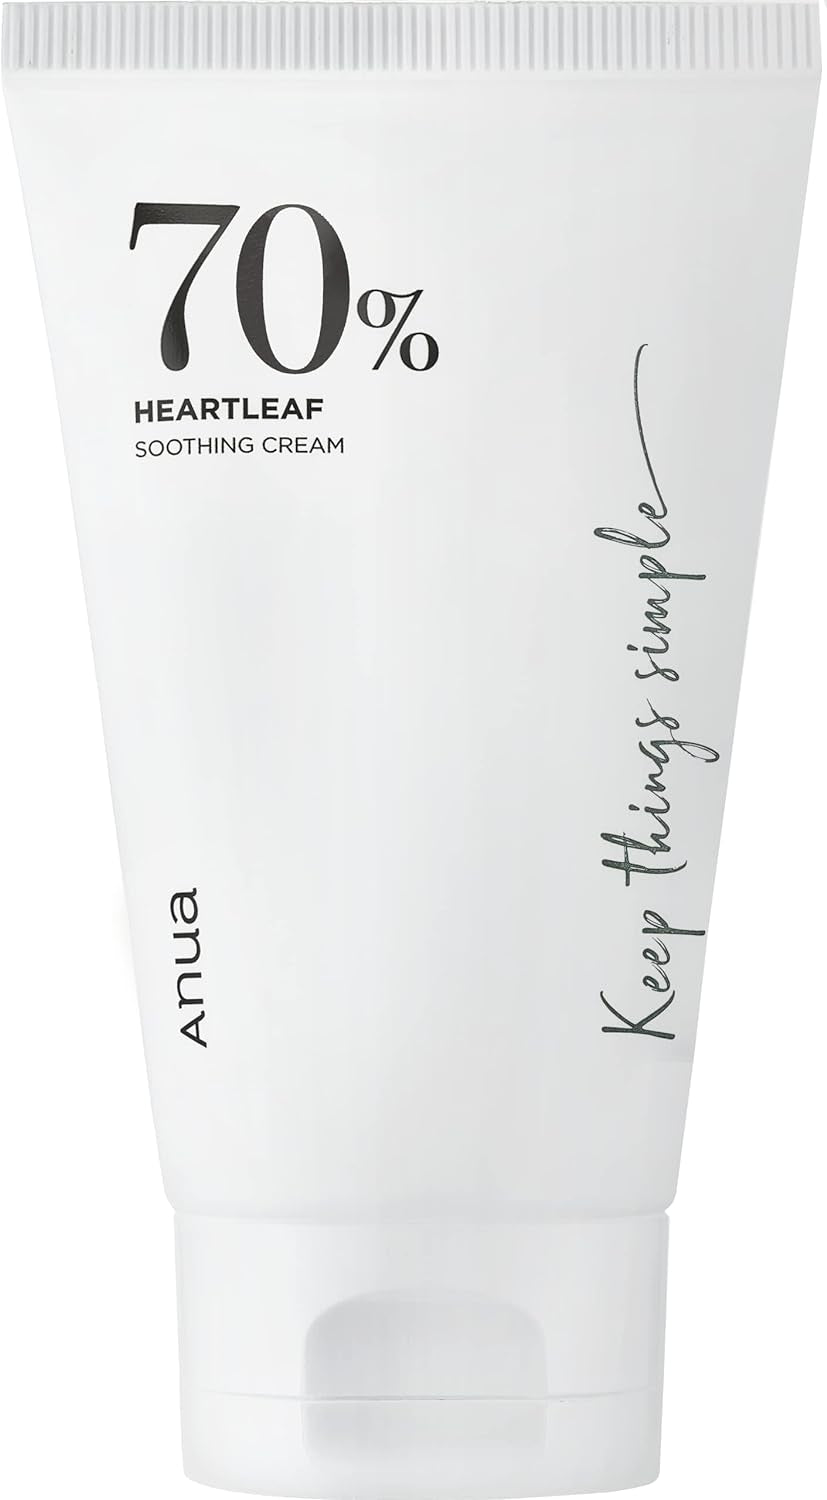 ANUA - Heartleaf 70% Soothing Cream 100Ml (3.38Oz) | Non-Sticky, Soothing, Heartleaf, for Combination Skin, Moisturizing, CICA, Panthenol